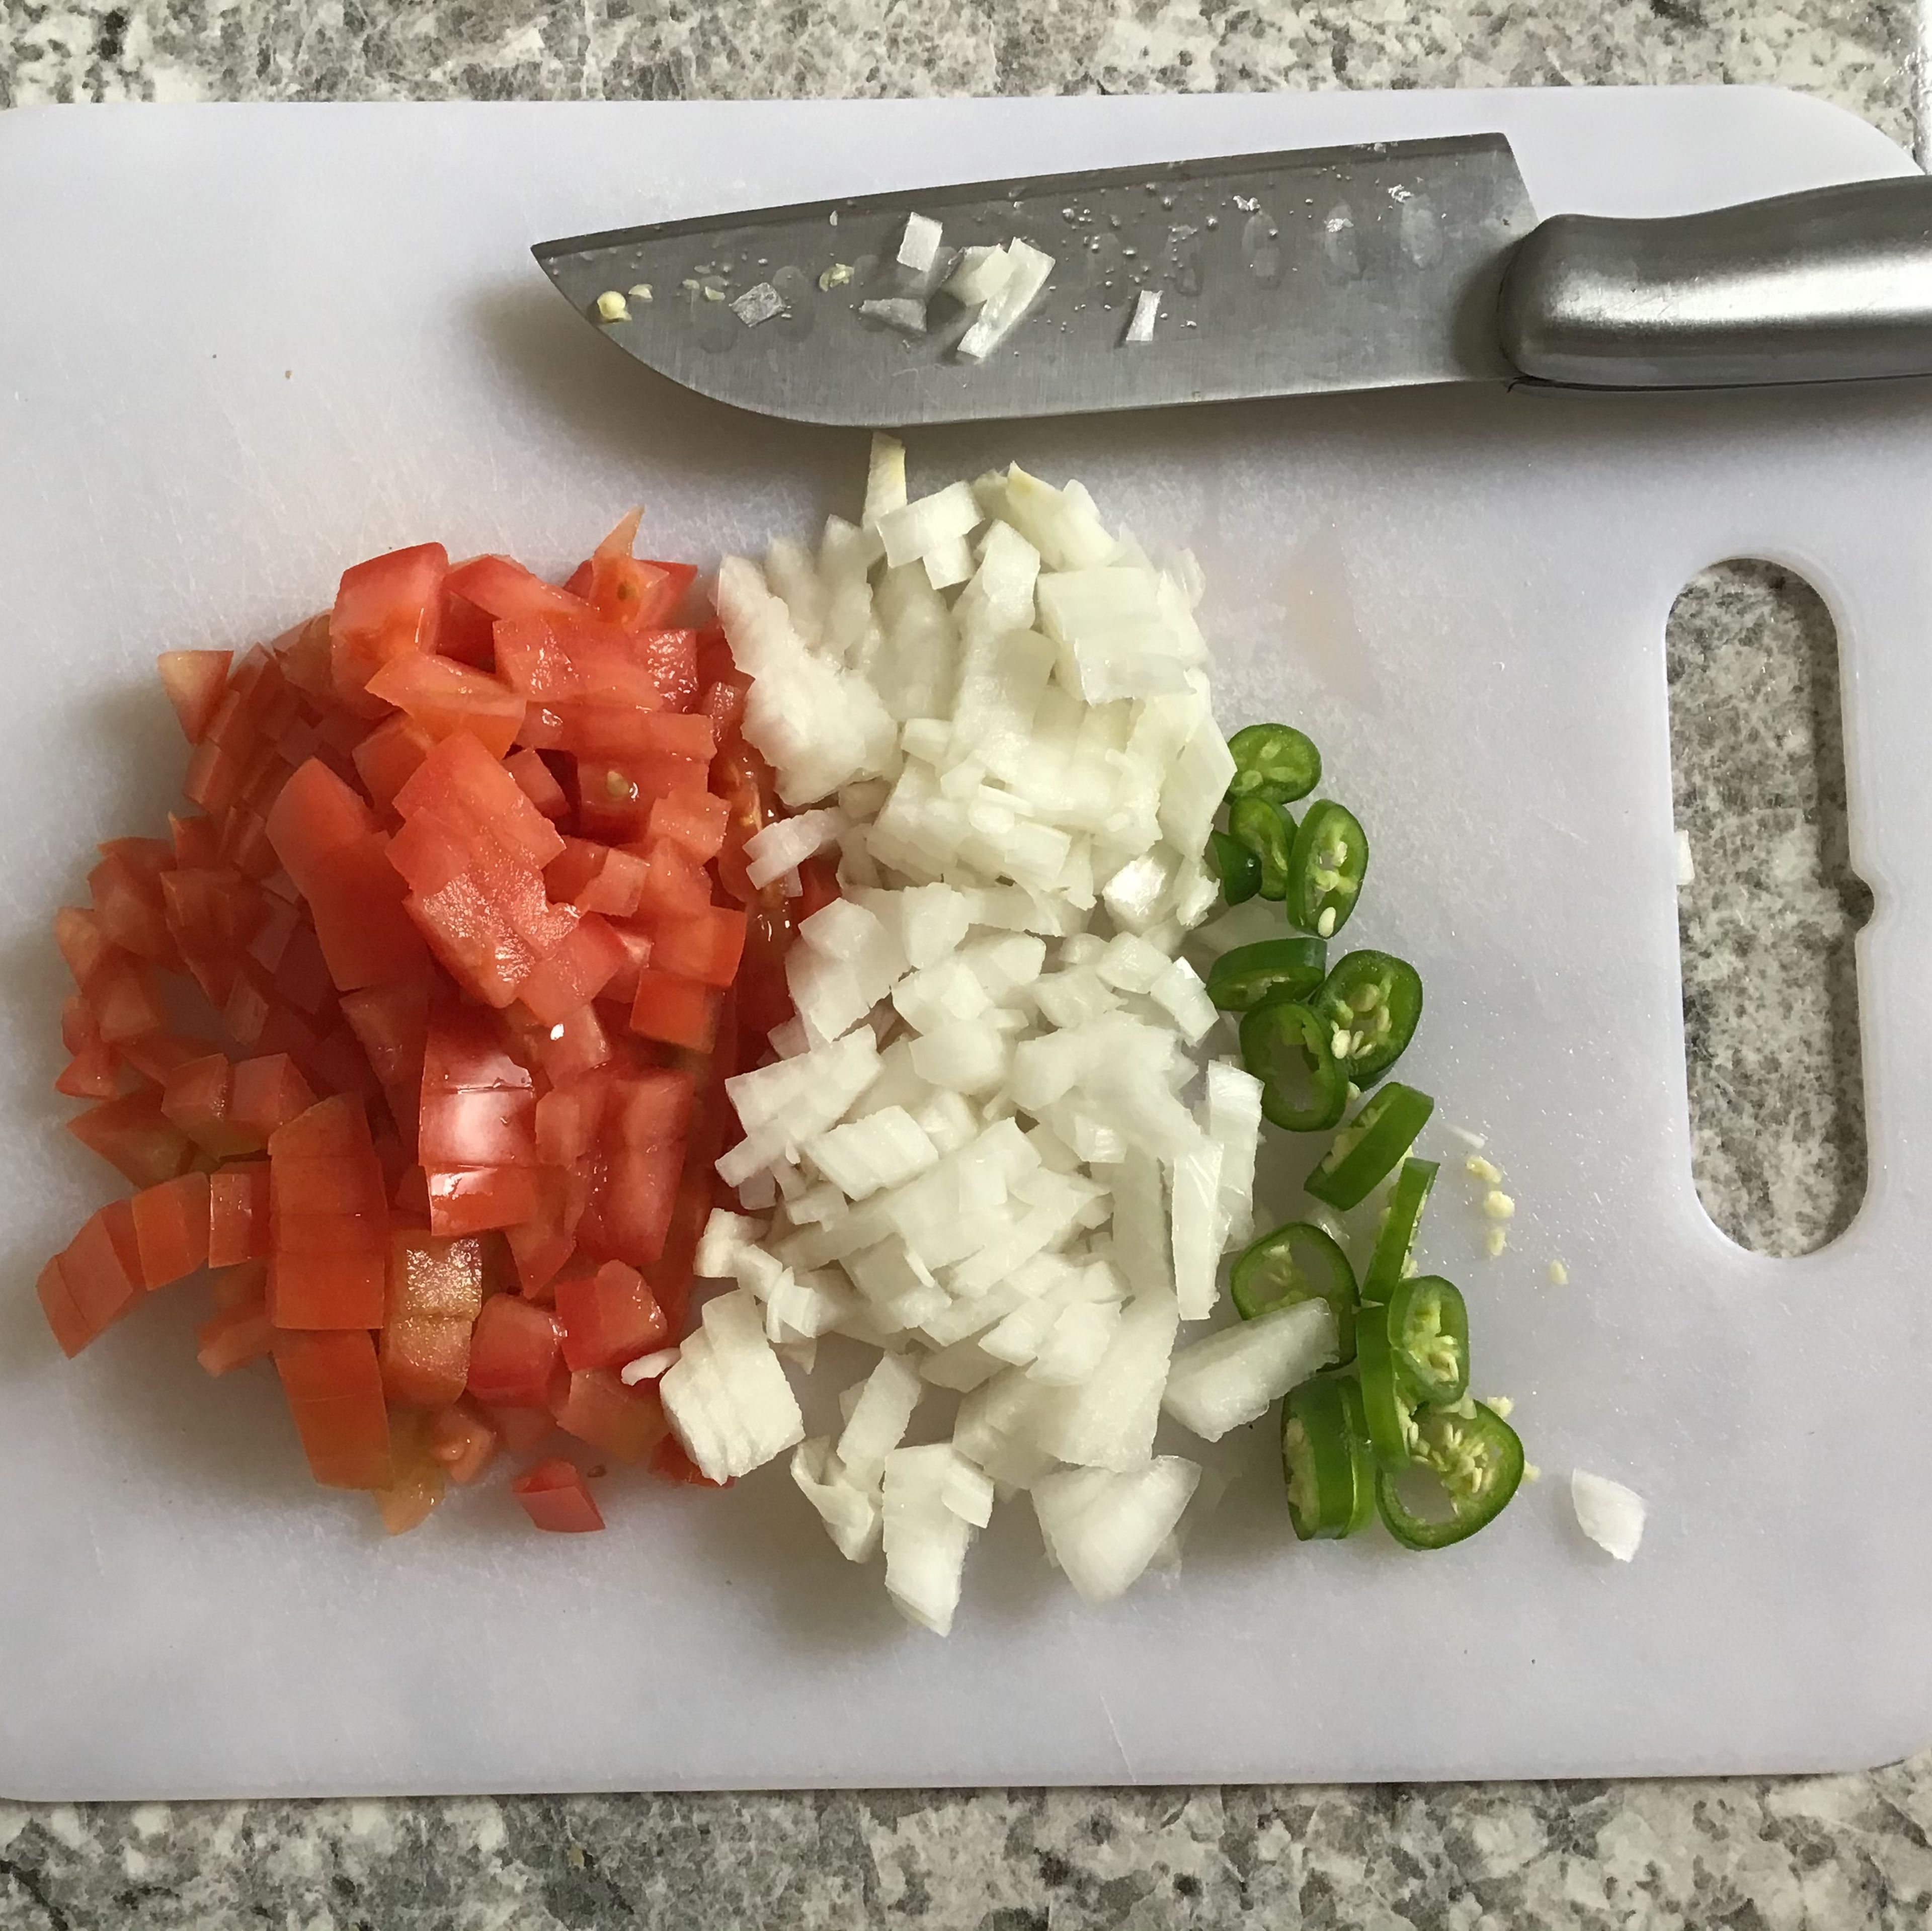 - Wash your hands - Chop up the tomato and onion into small cubes. - Chop up Serrano pepper into small circles or however you want.